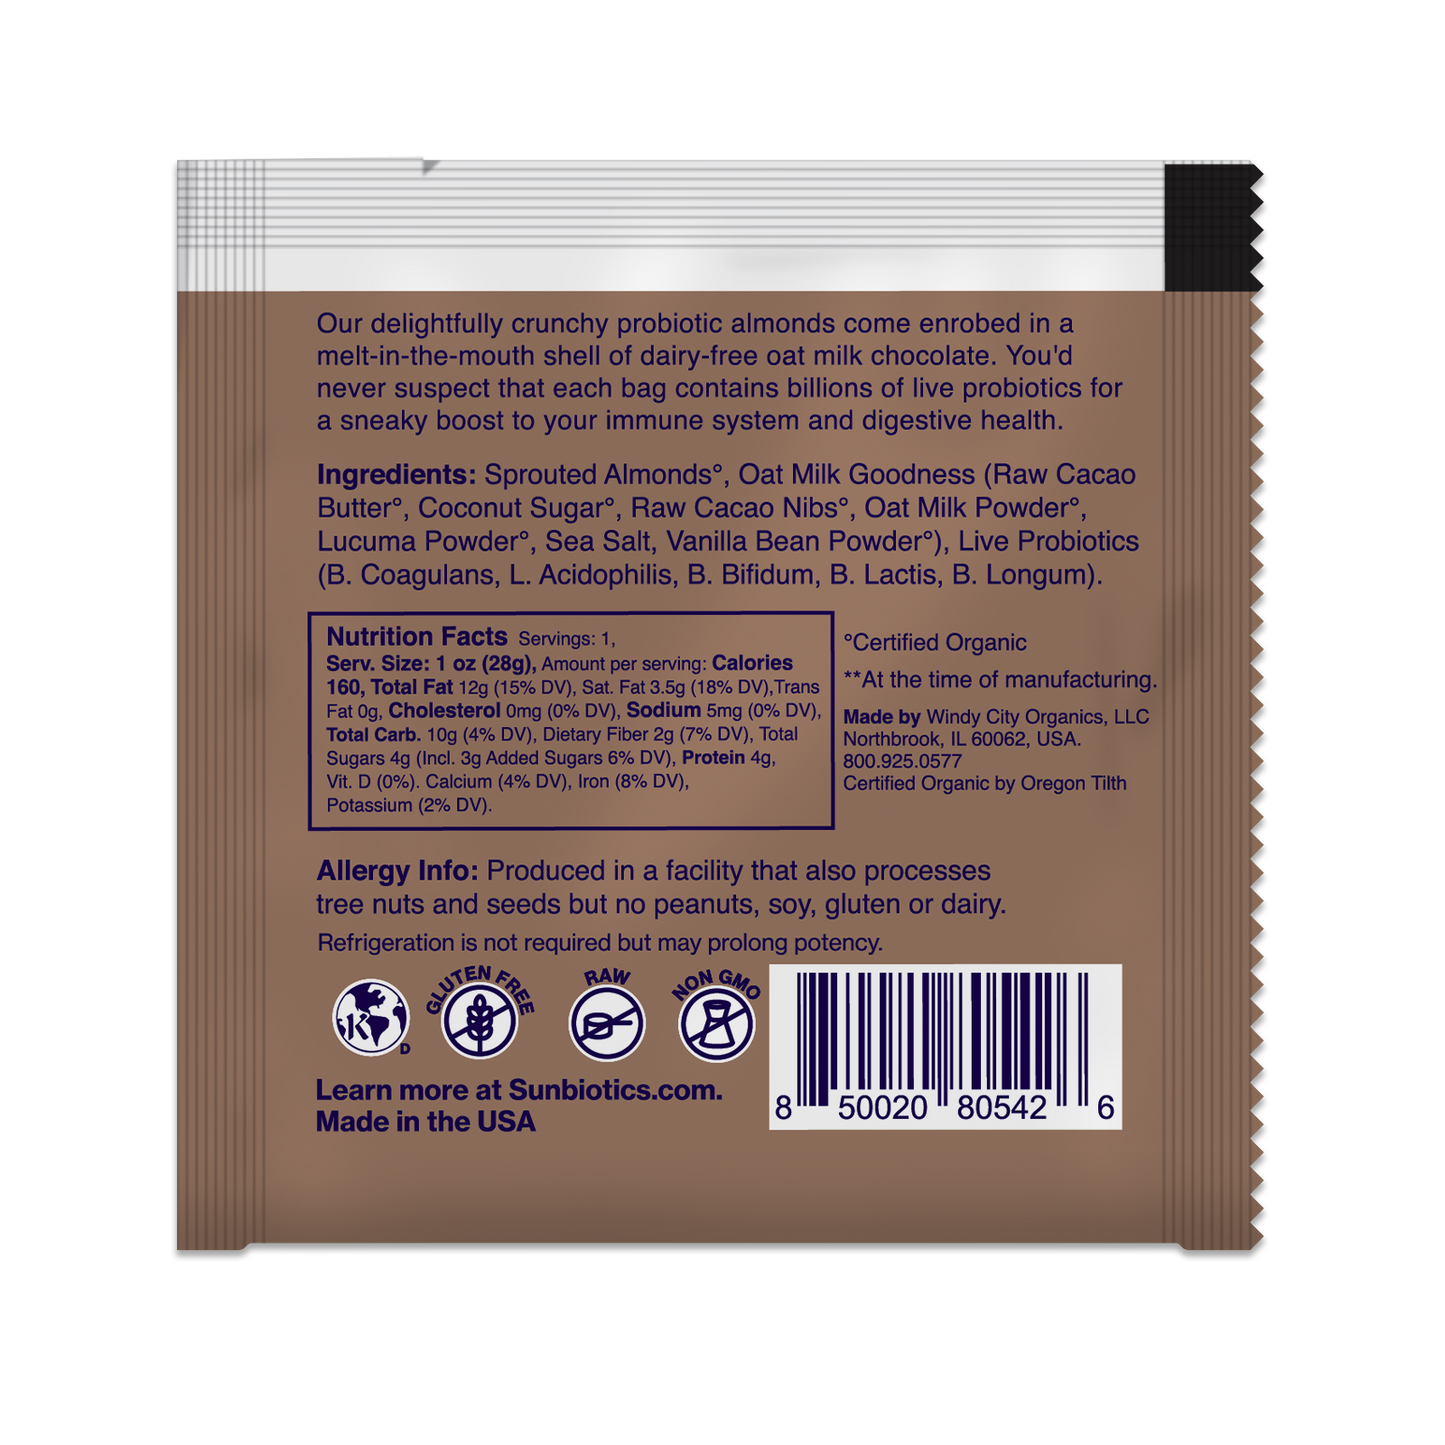 Back of the package with Ingredients and Nutrition Facts.